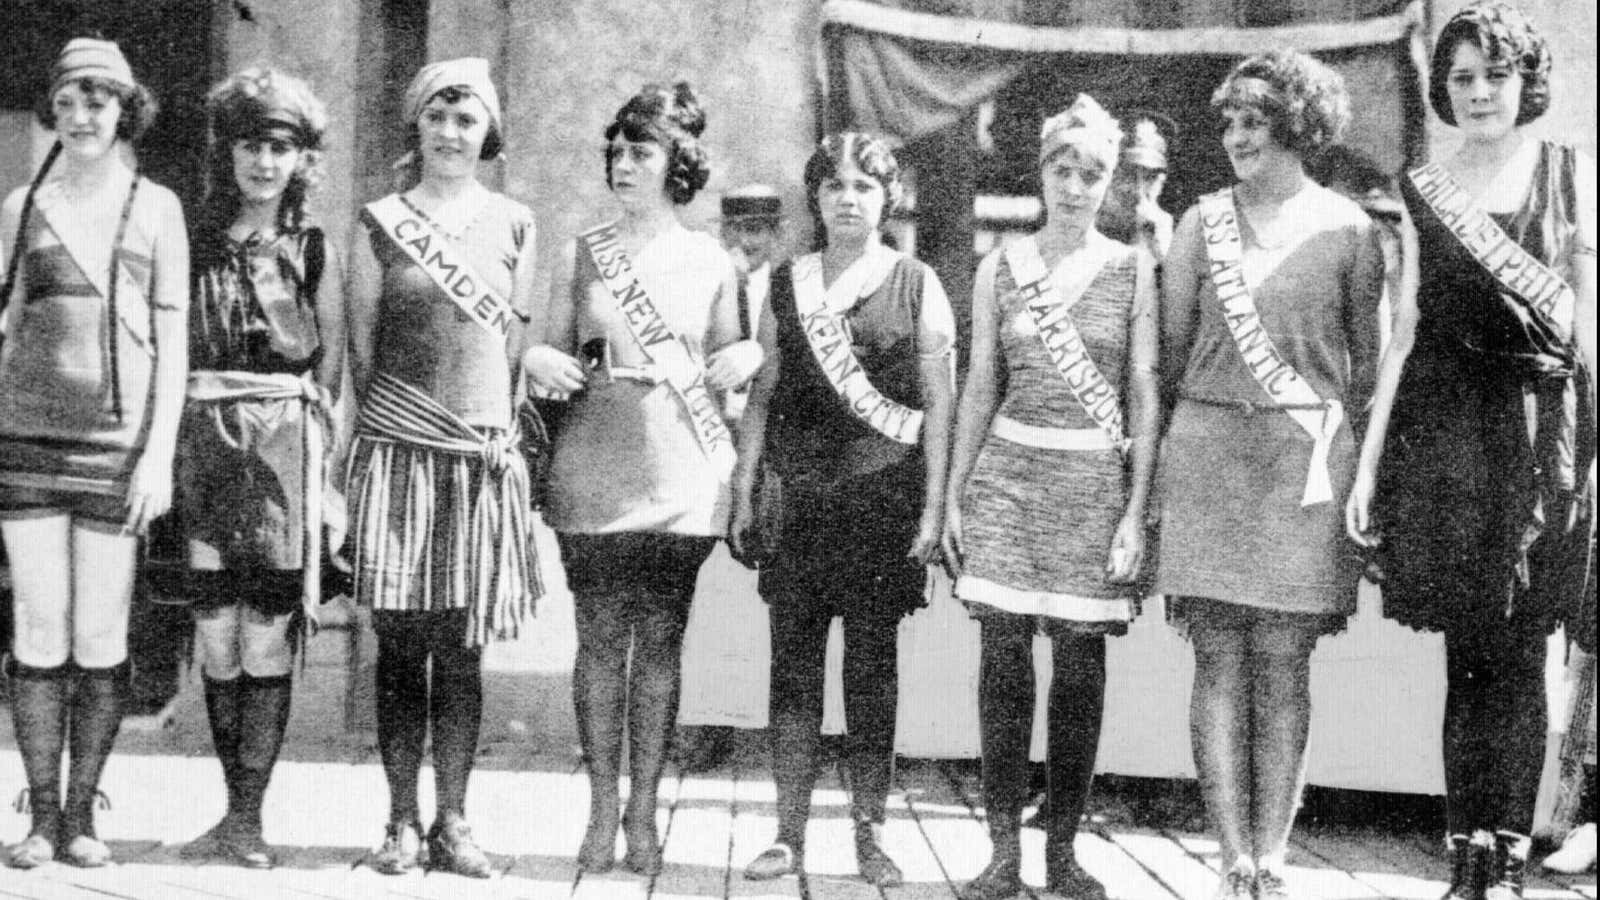 These swimsuits from the 1921 Miss America pageant must be what Maurice Lévy had in mind.